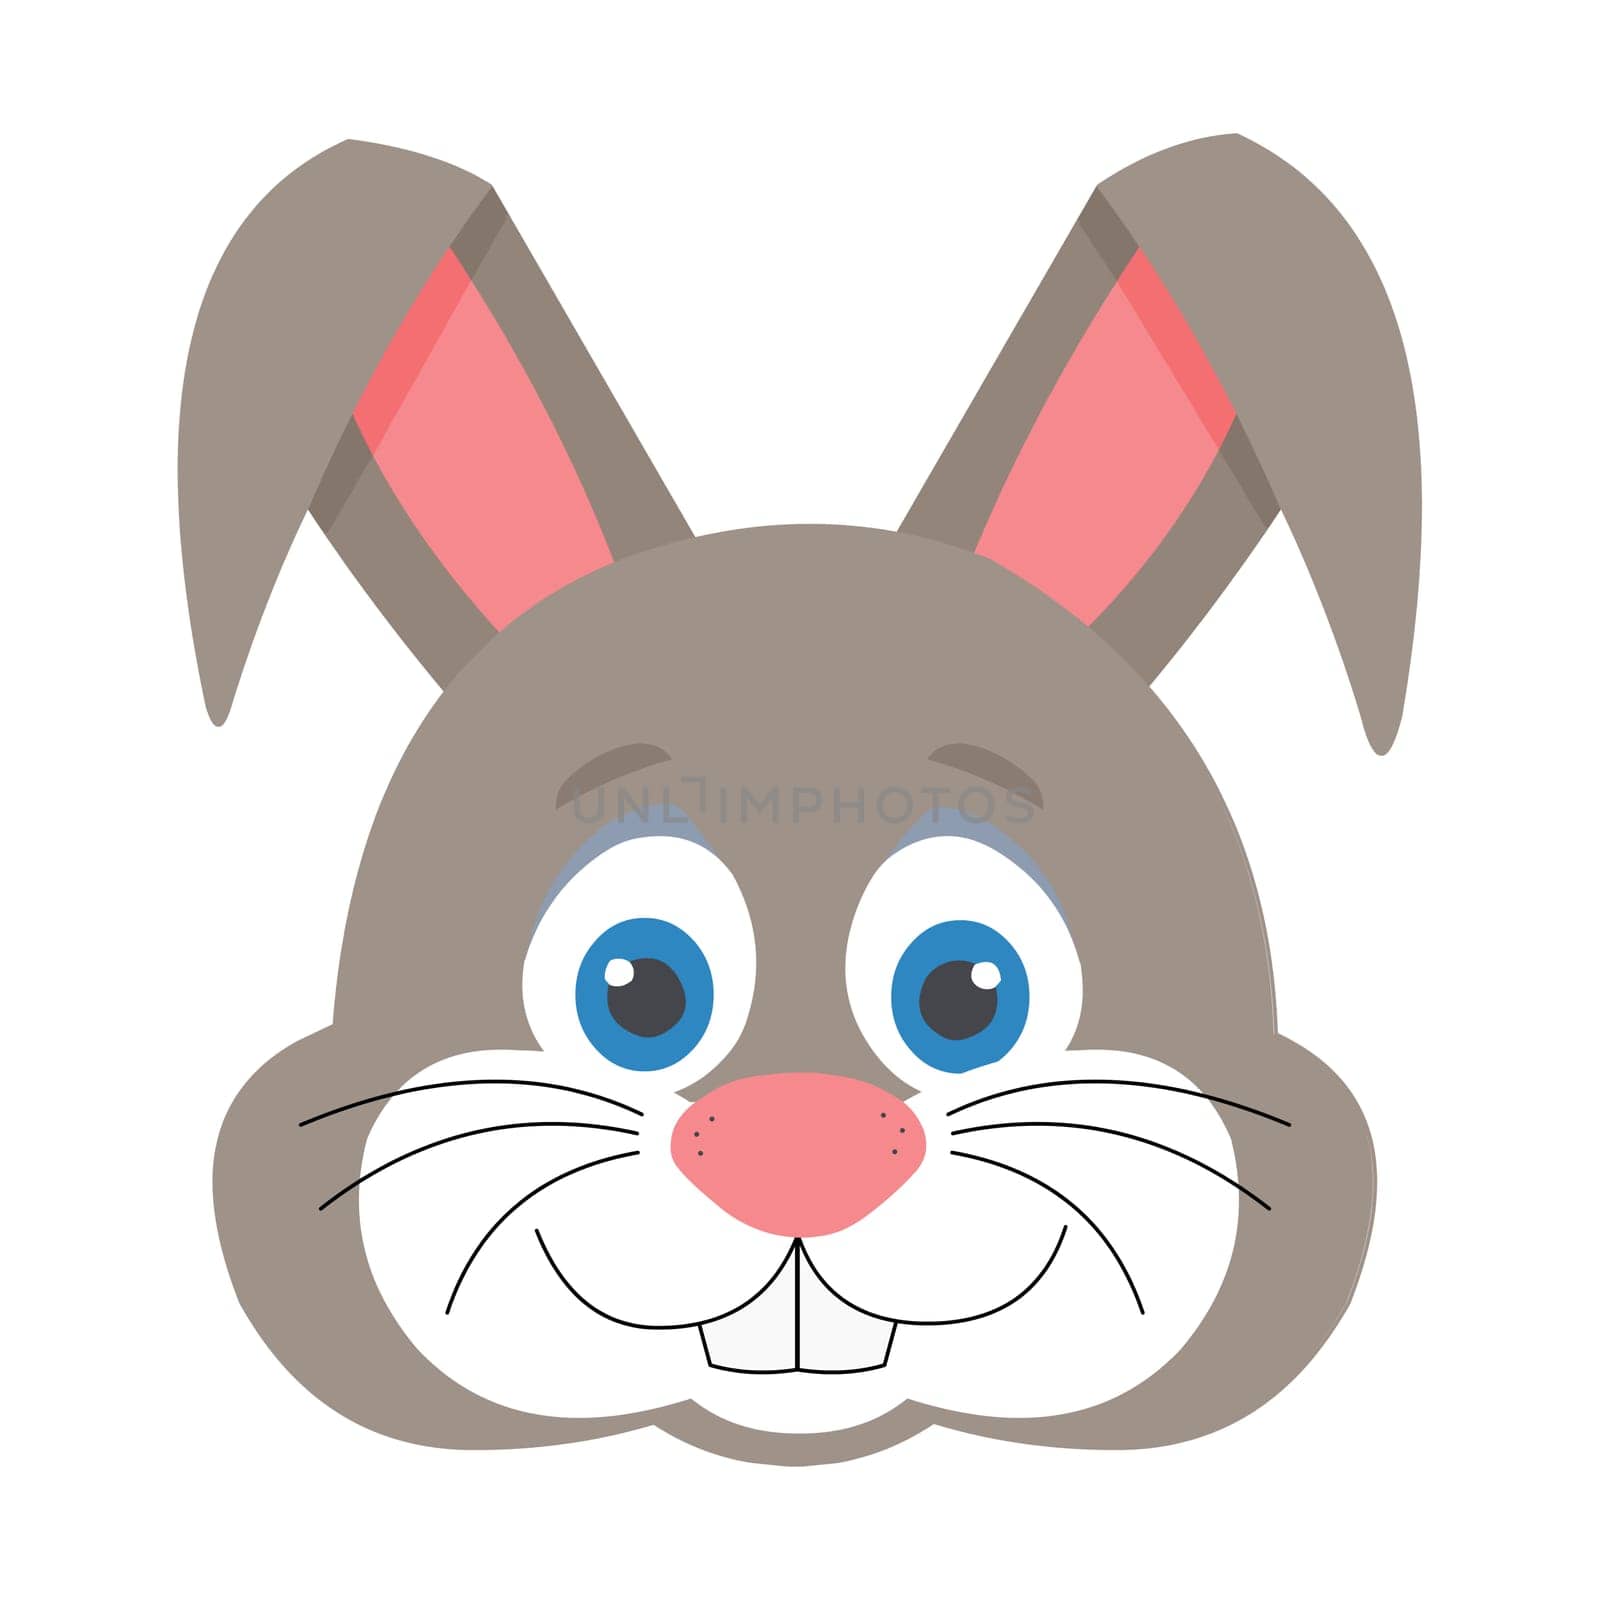 A cute bunny face with large blue eyes.